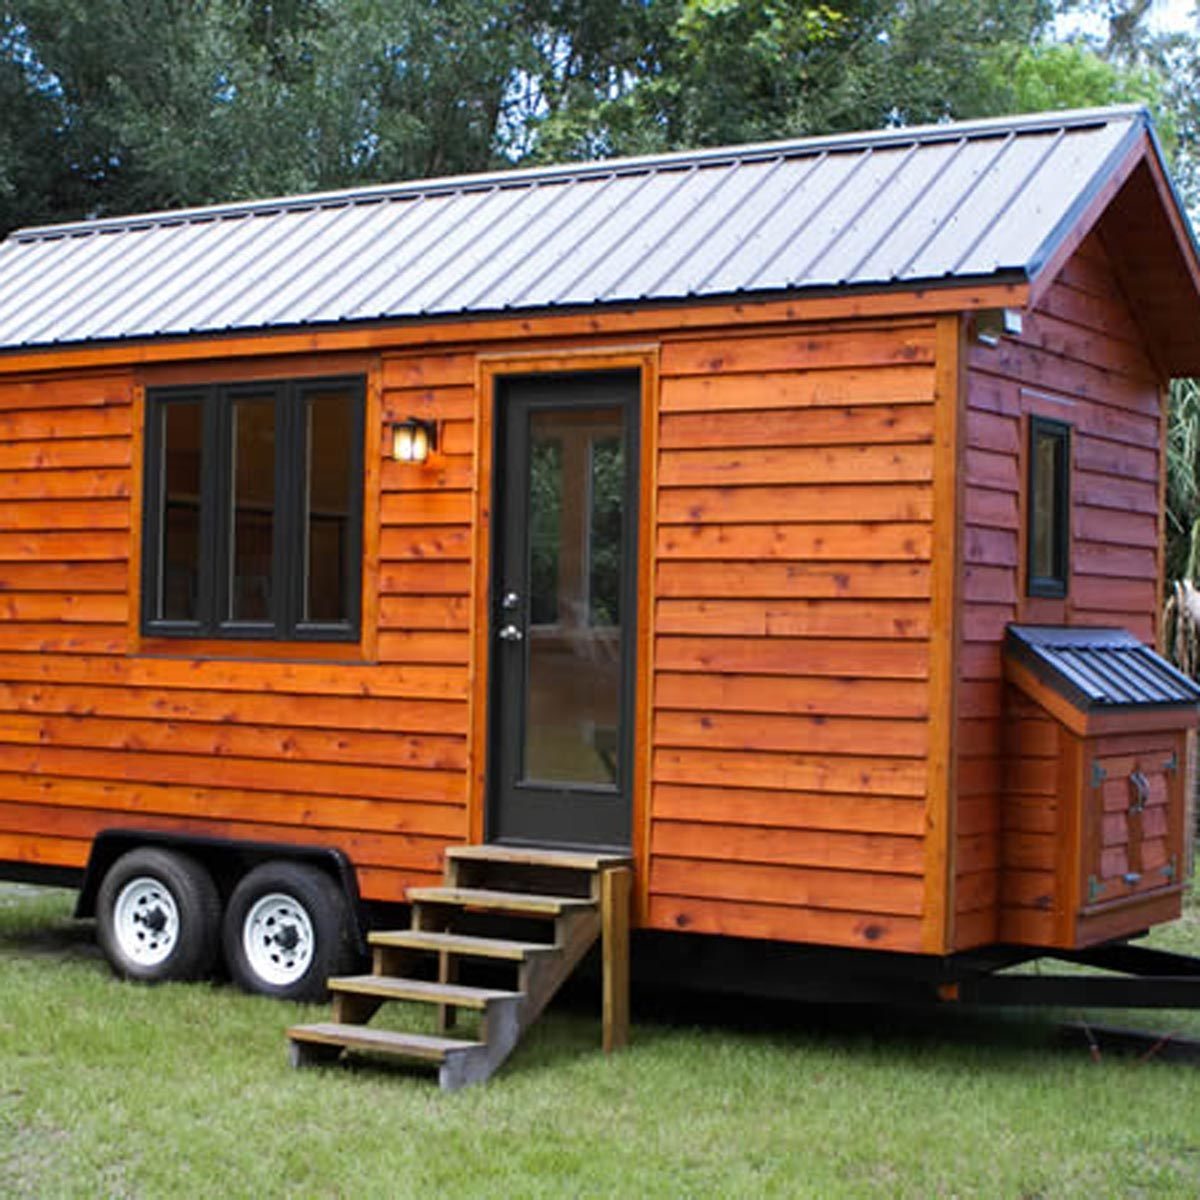 The 15 Best Tiny Homes to Buy After Retirement The 